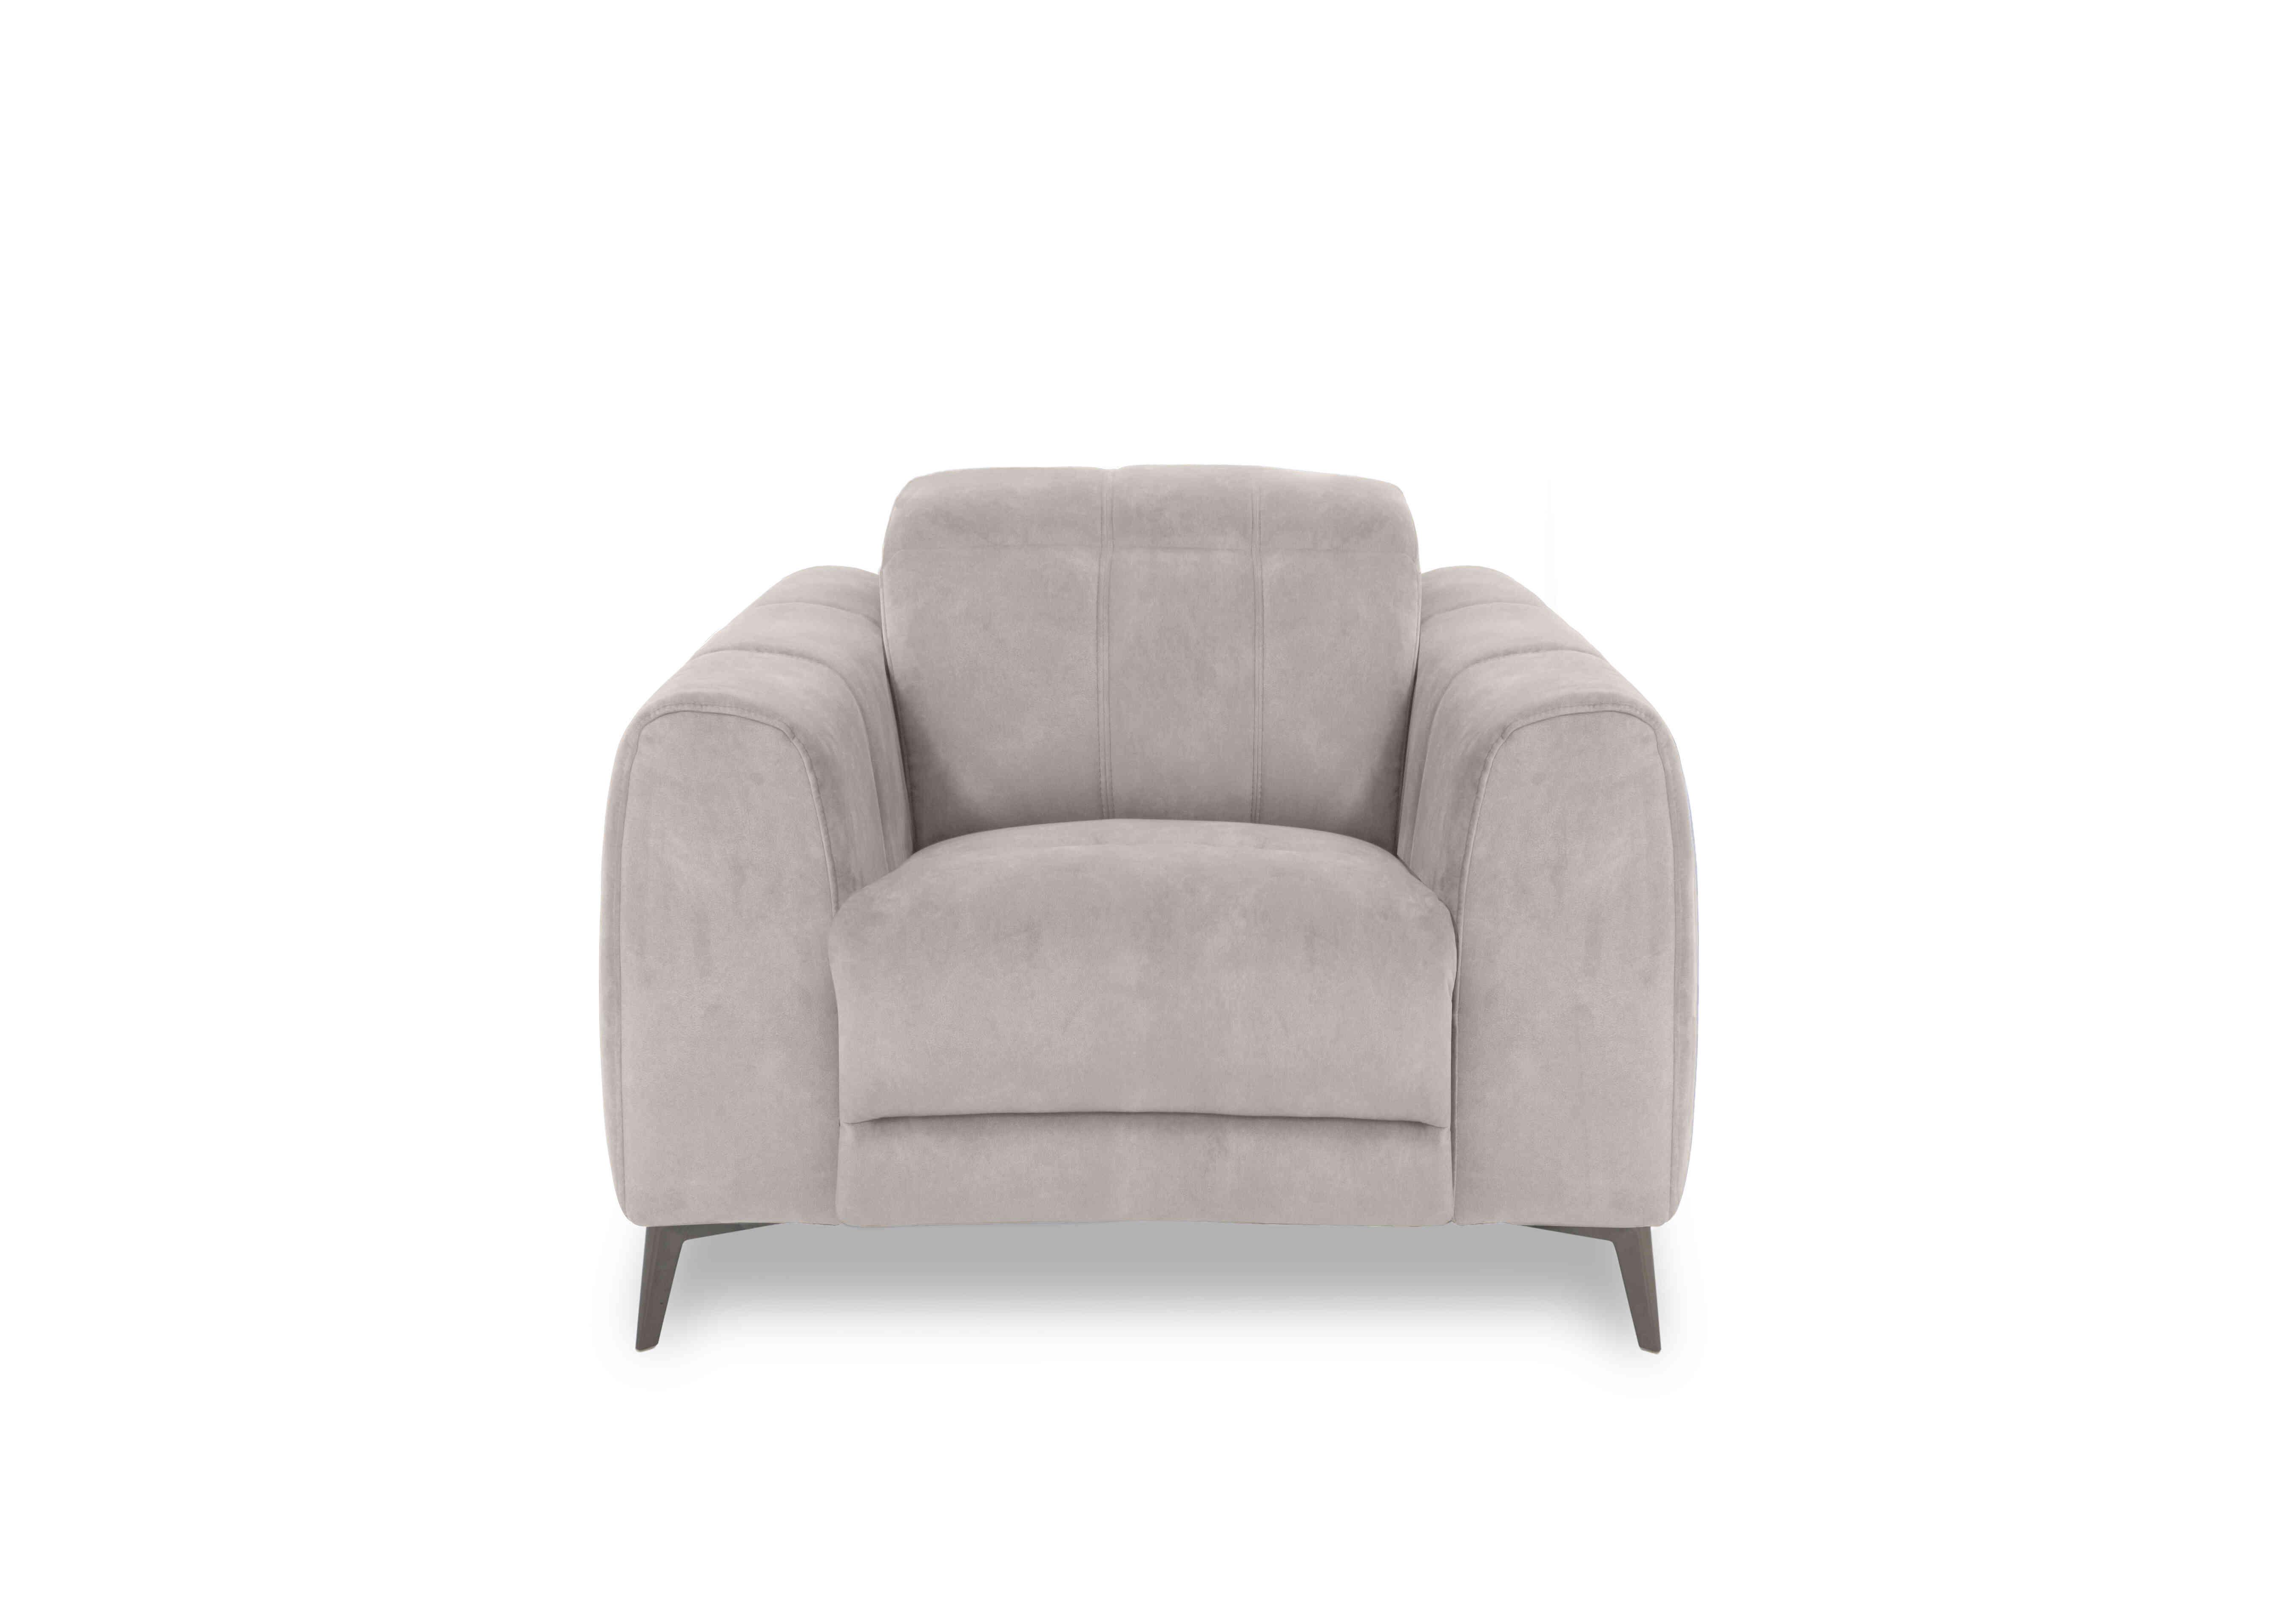 Ezra Fabric Chair in Dexter 43501 Ivory on Furniture Village